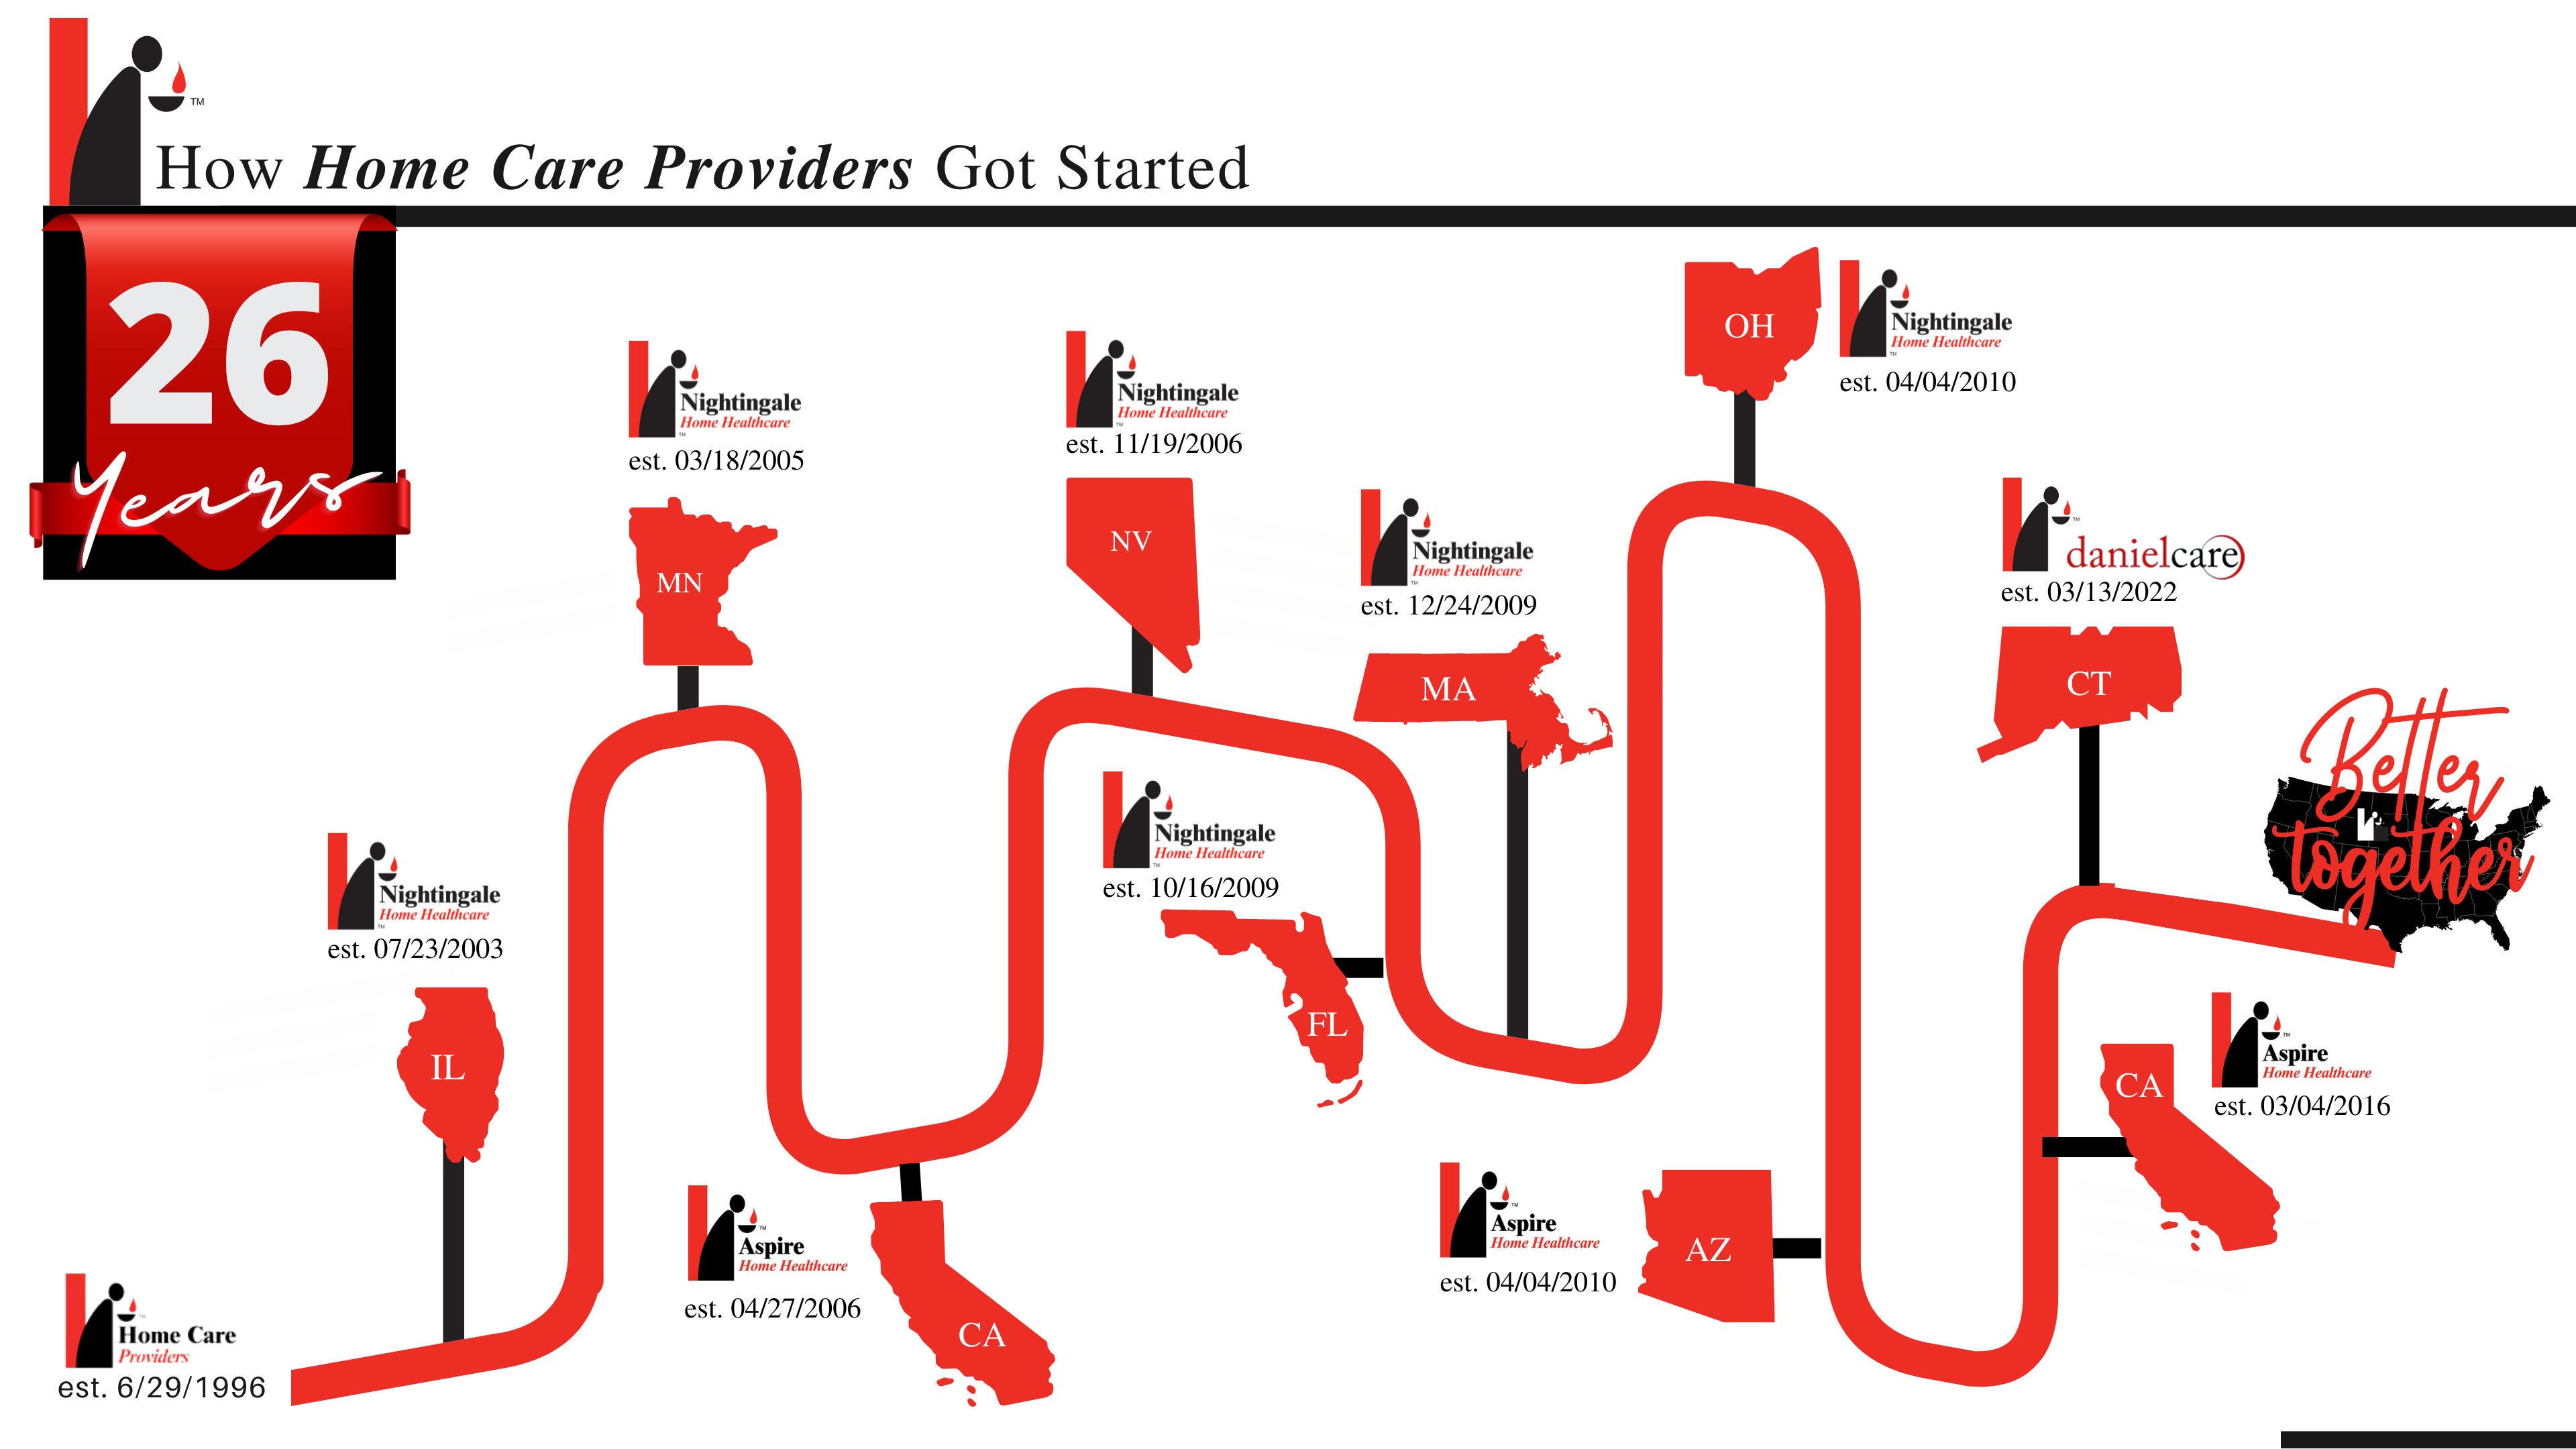 Home Care Providers Timeline